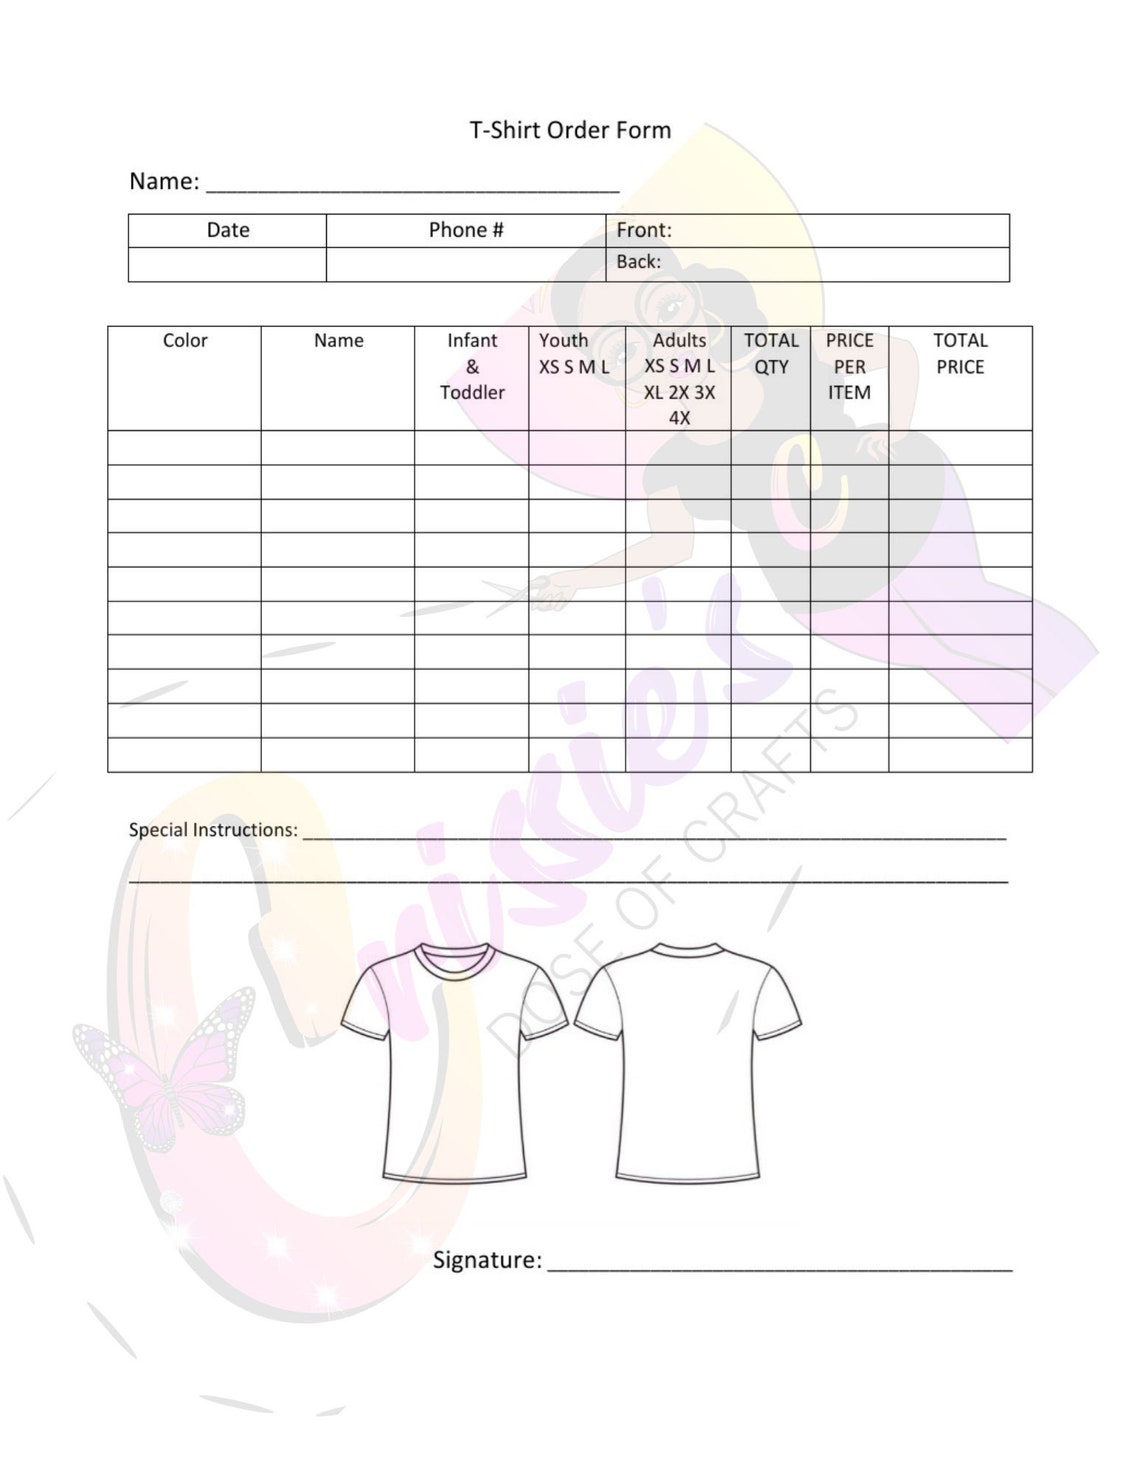 T-Shirt Order Form Template Printable